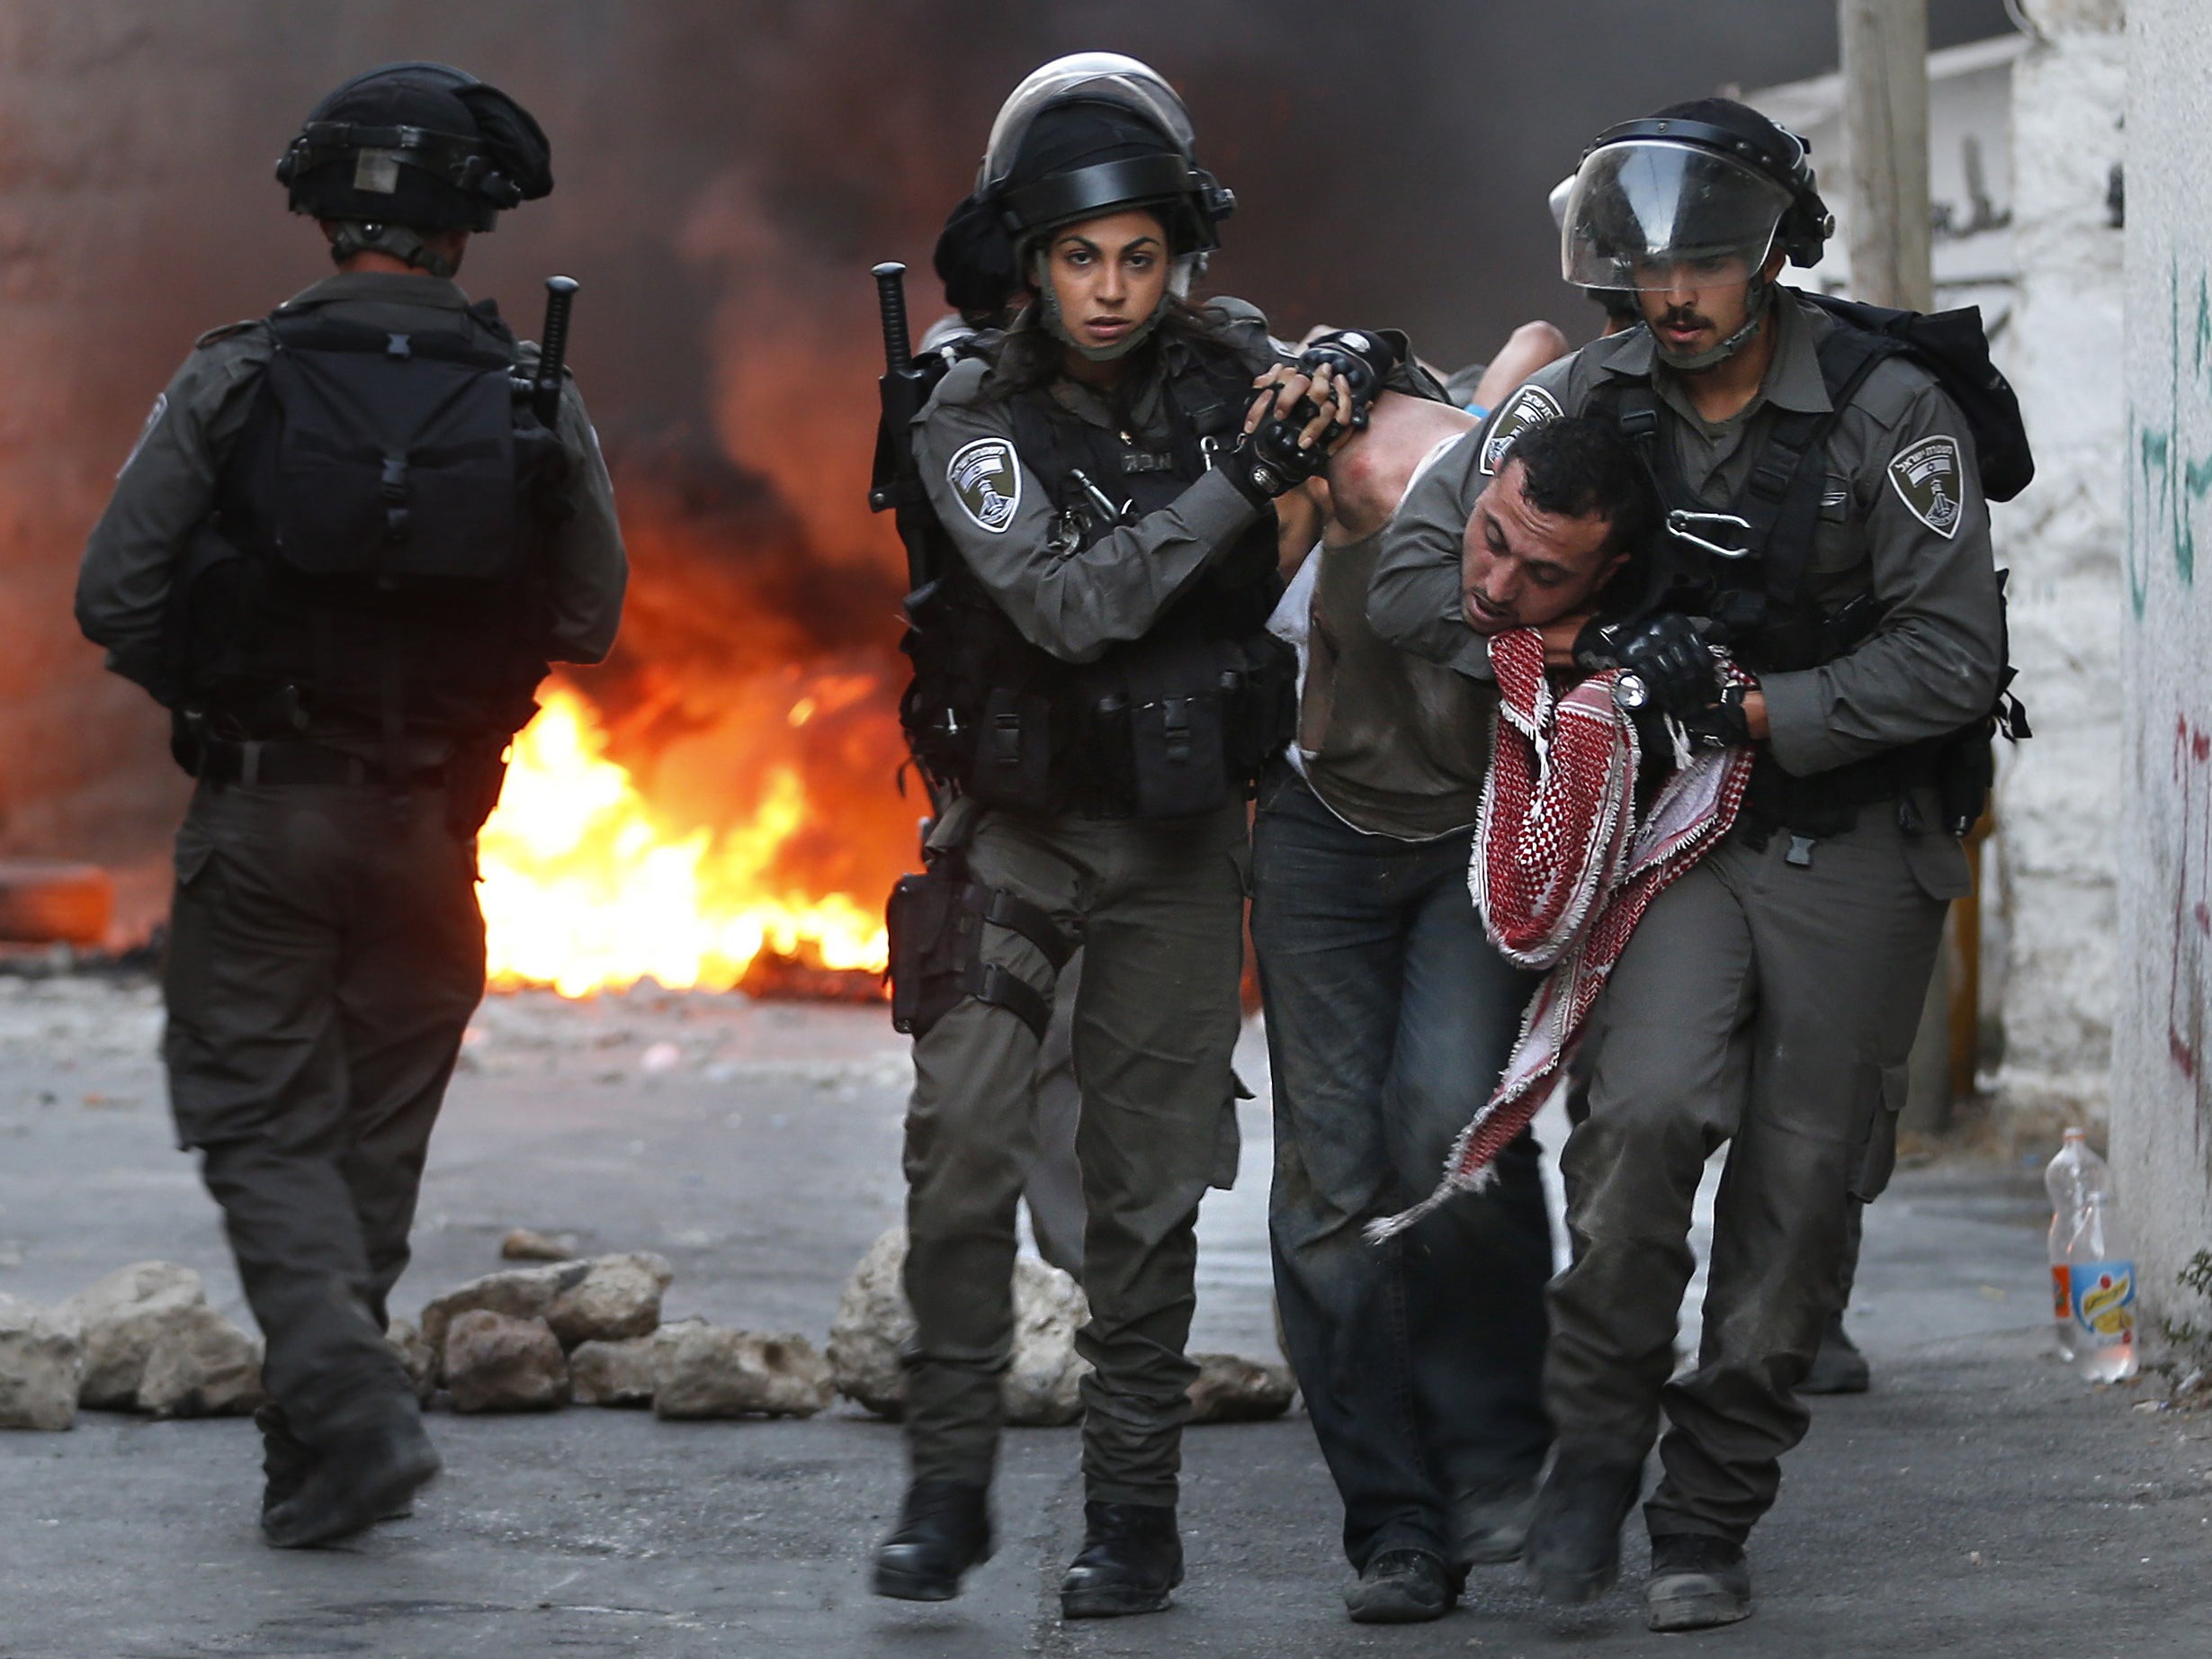 Israel police arrest Palestinian during clashes in east Jerusalem in 2015